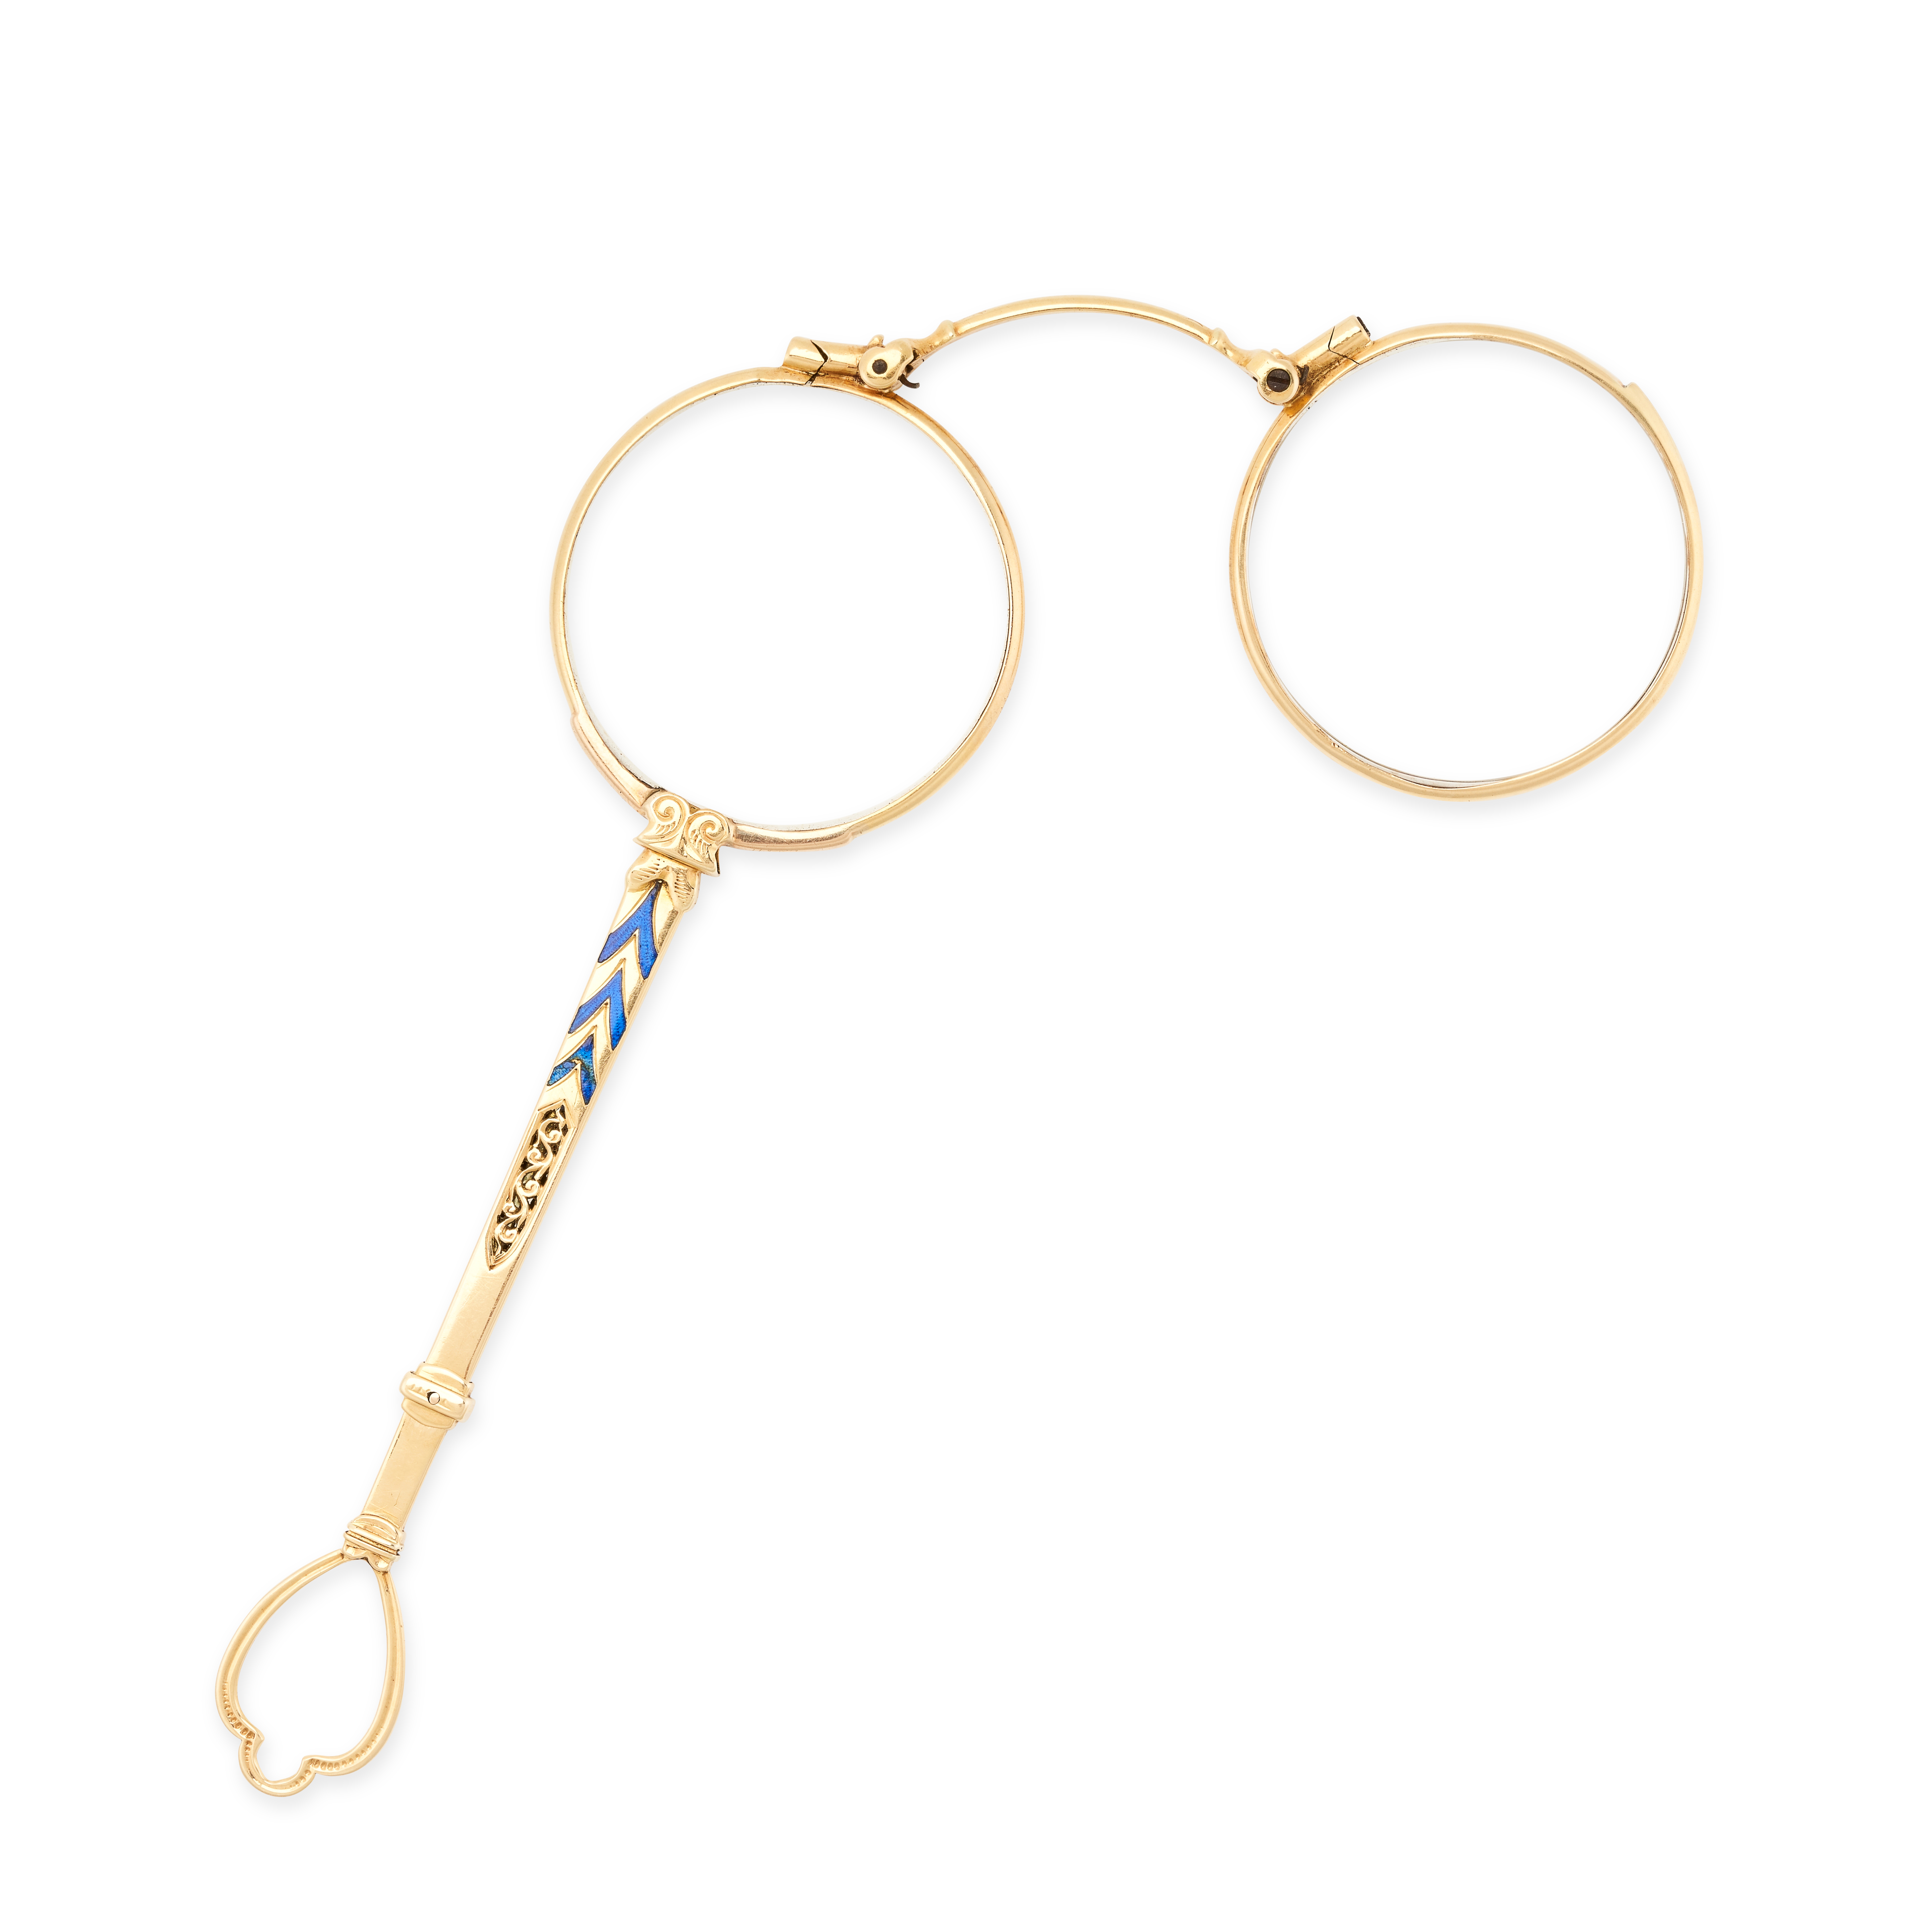 AN ENAMEL LORGNETTE, EARLY 20TH CENTURY in 14ct yellow gold, the tapering bangle with blue enamel